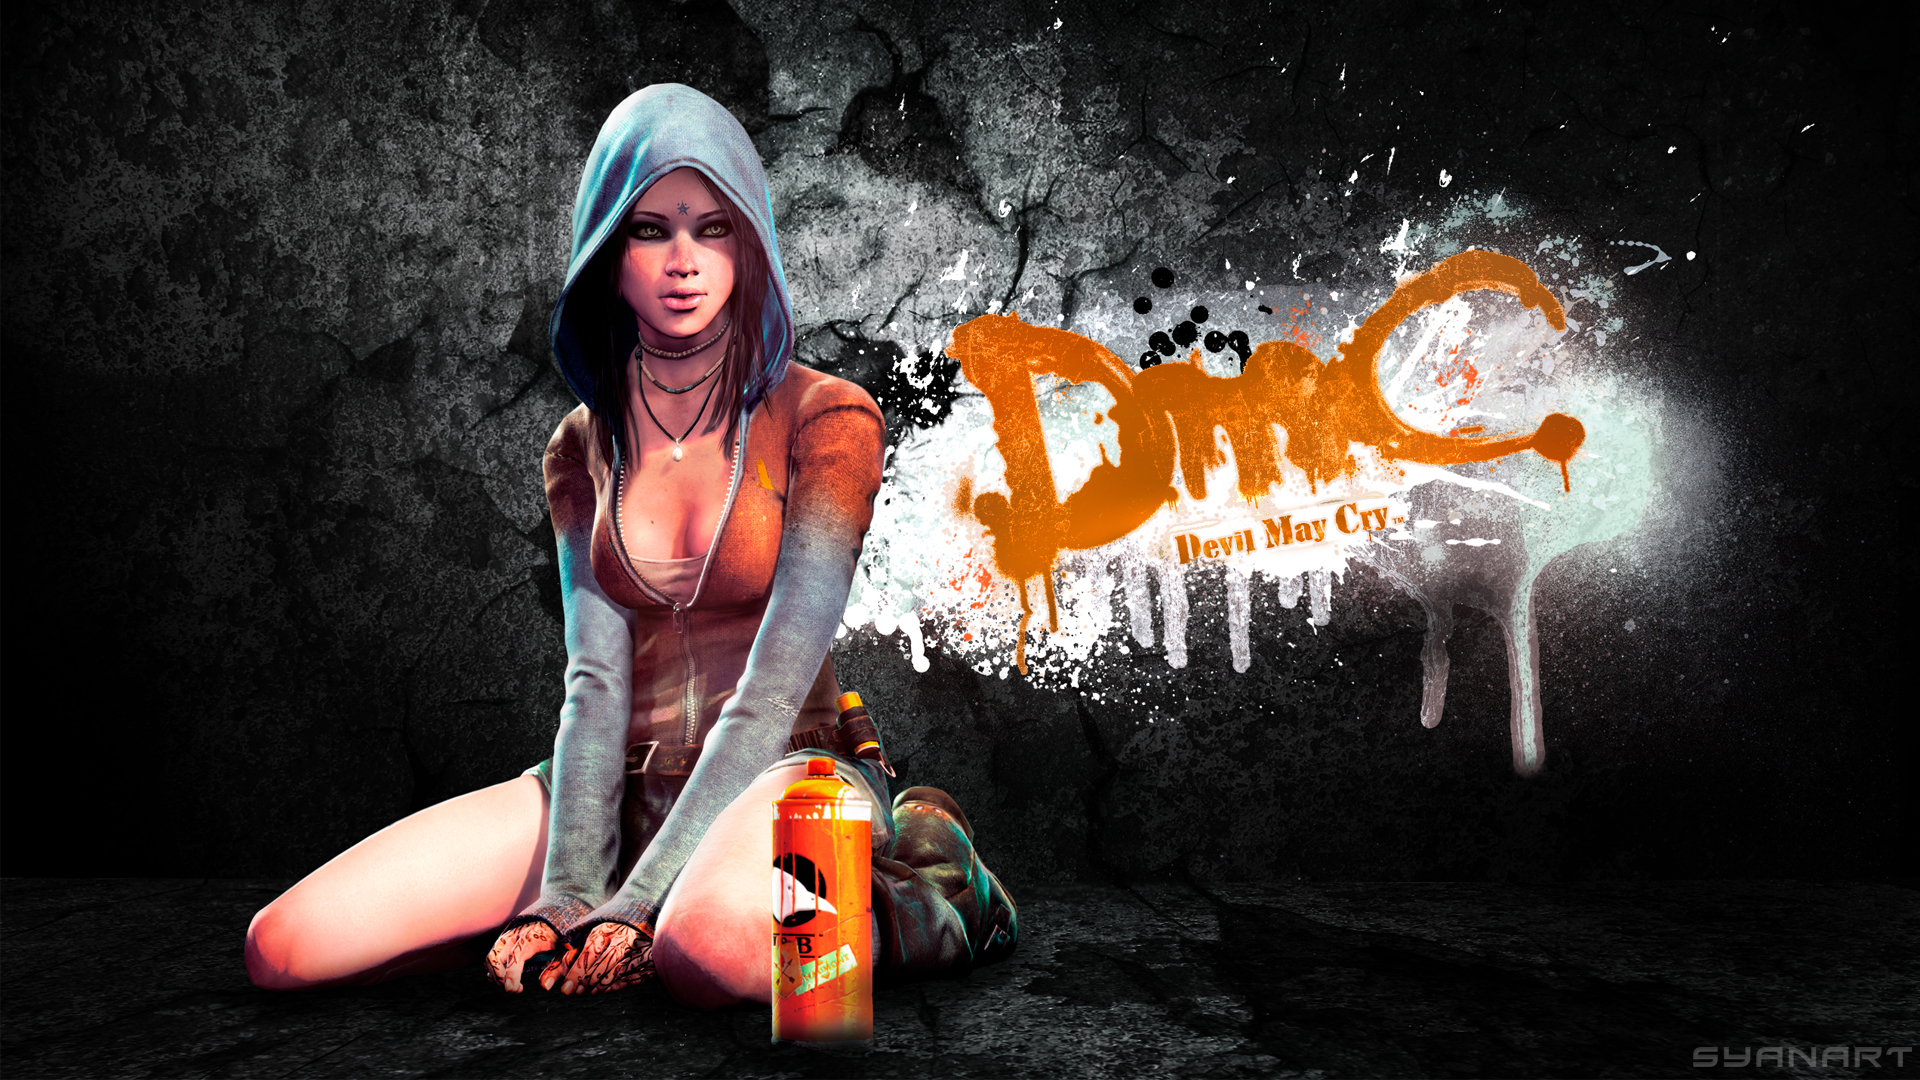 Handy-Wallpaper Devil May Cry, Computerspiele, Dmc: Devil May Cry, Kat (Devil May Cry) kostenlos herunterladen.